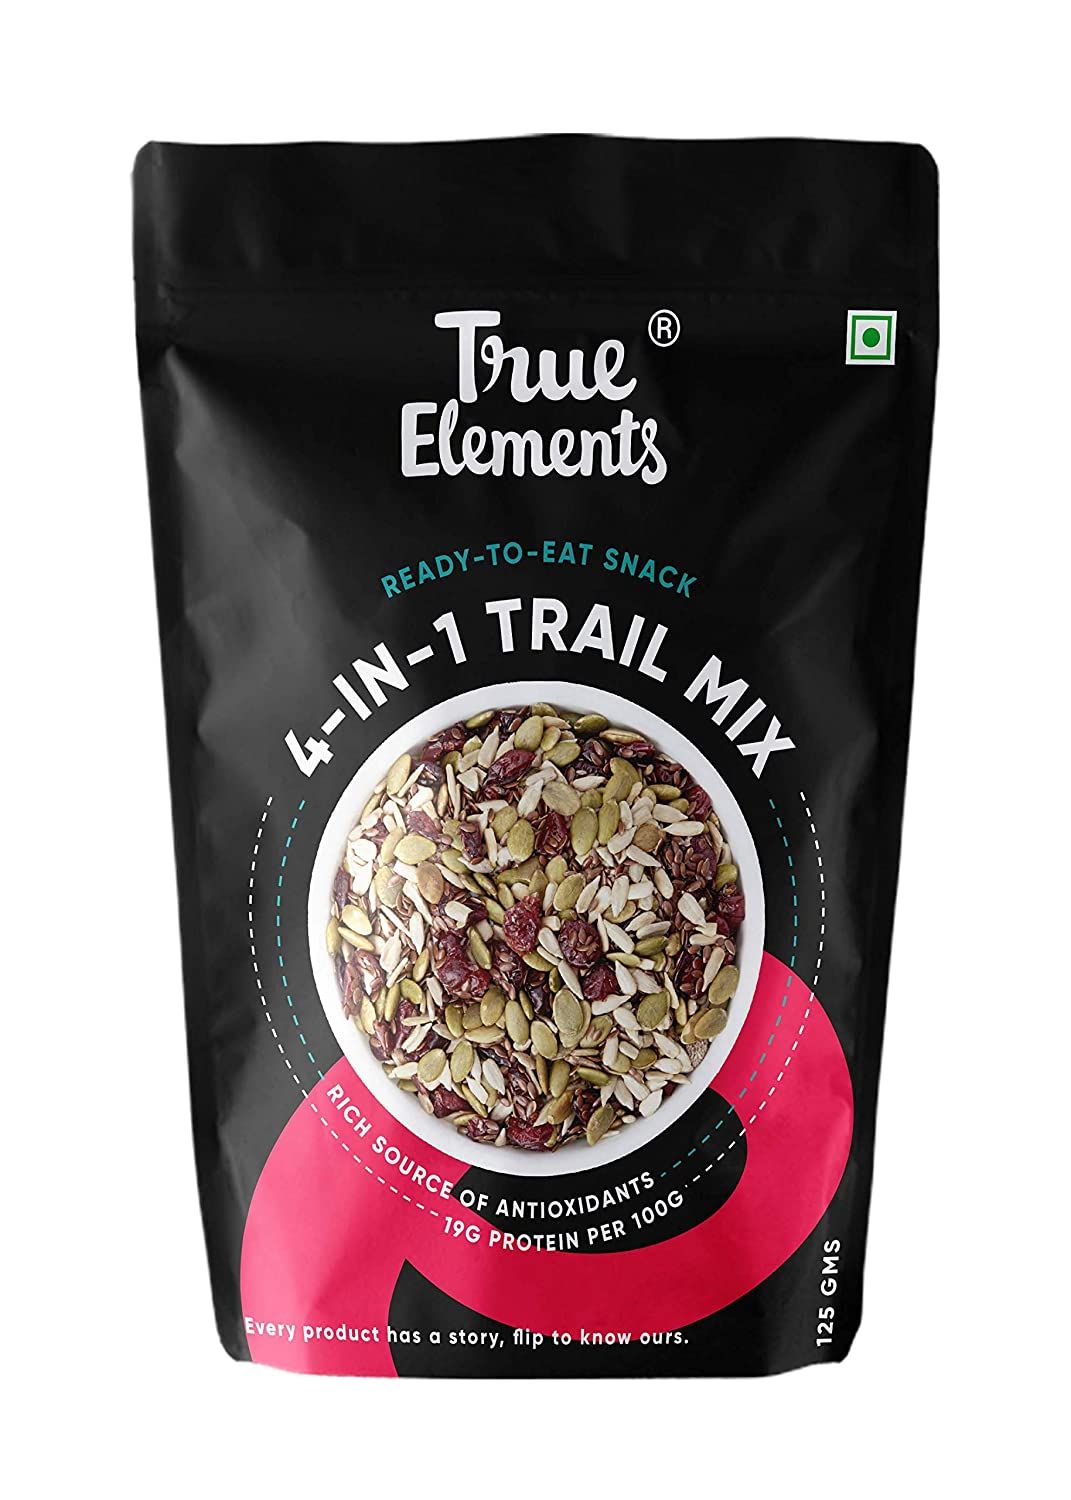 True Elements 4 in 1 Trail Mix Image